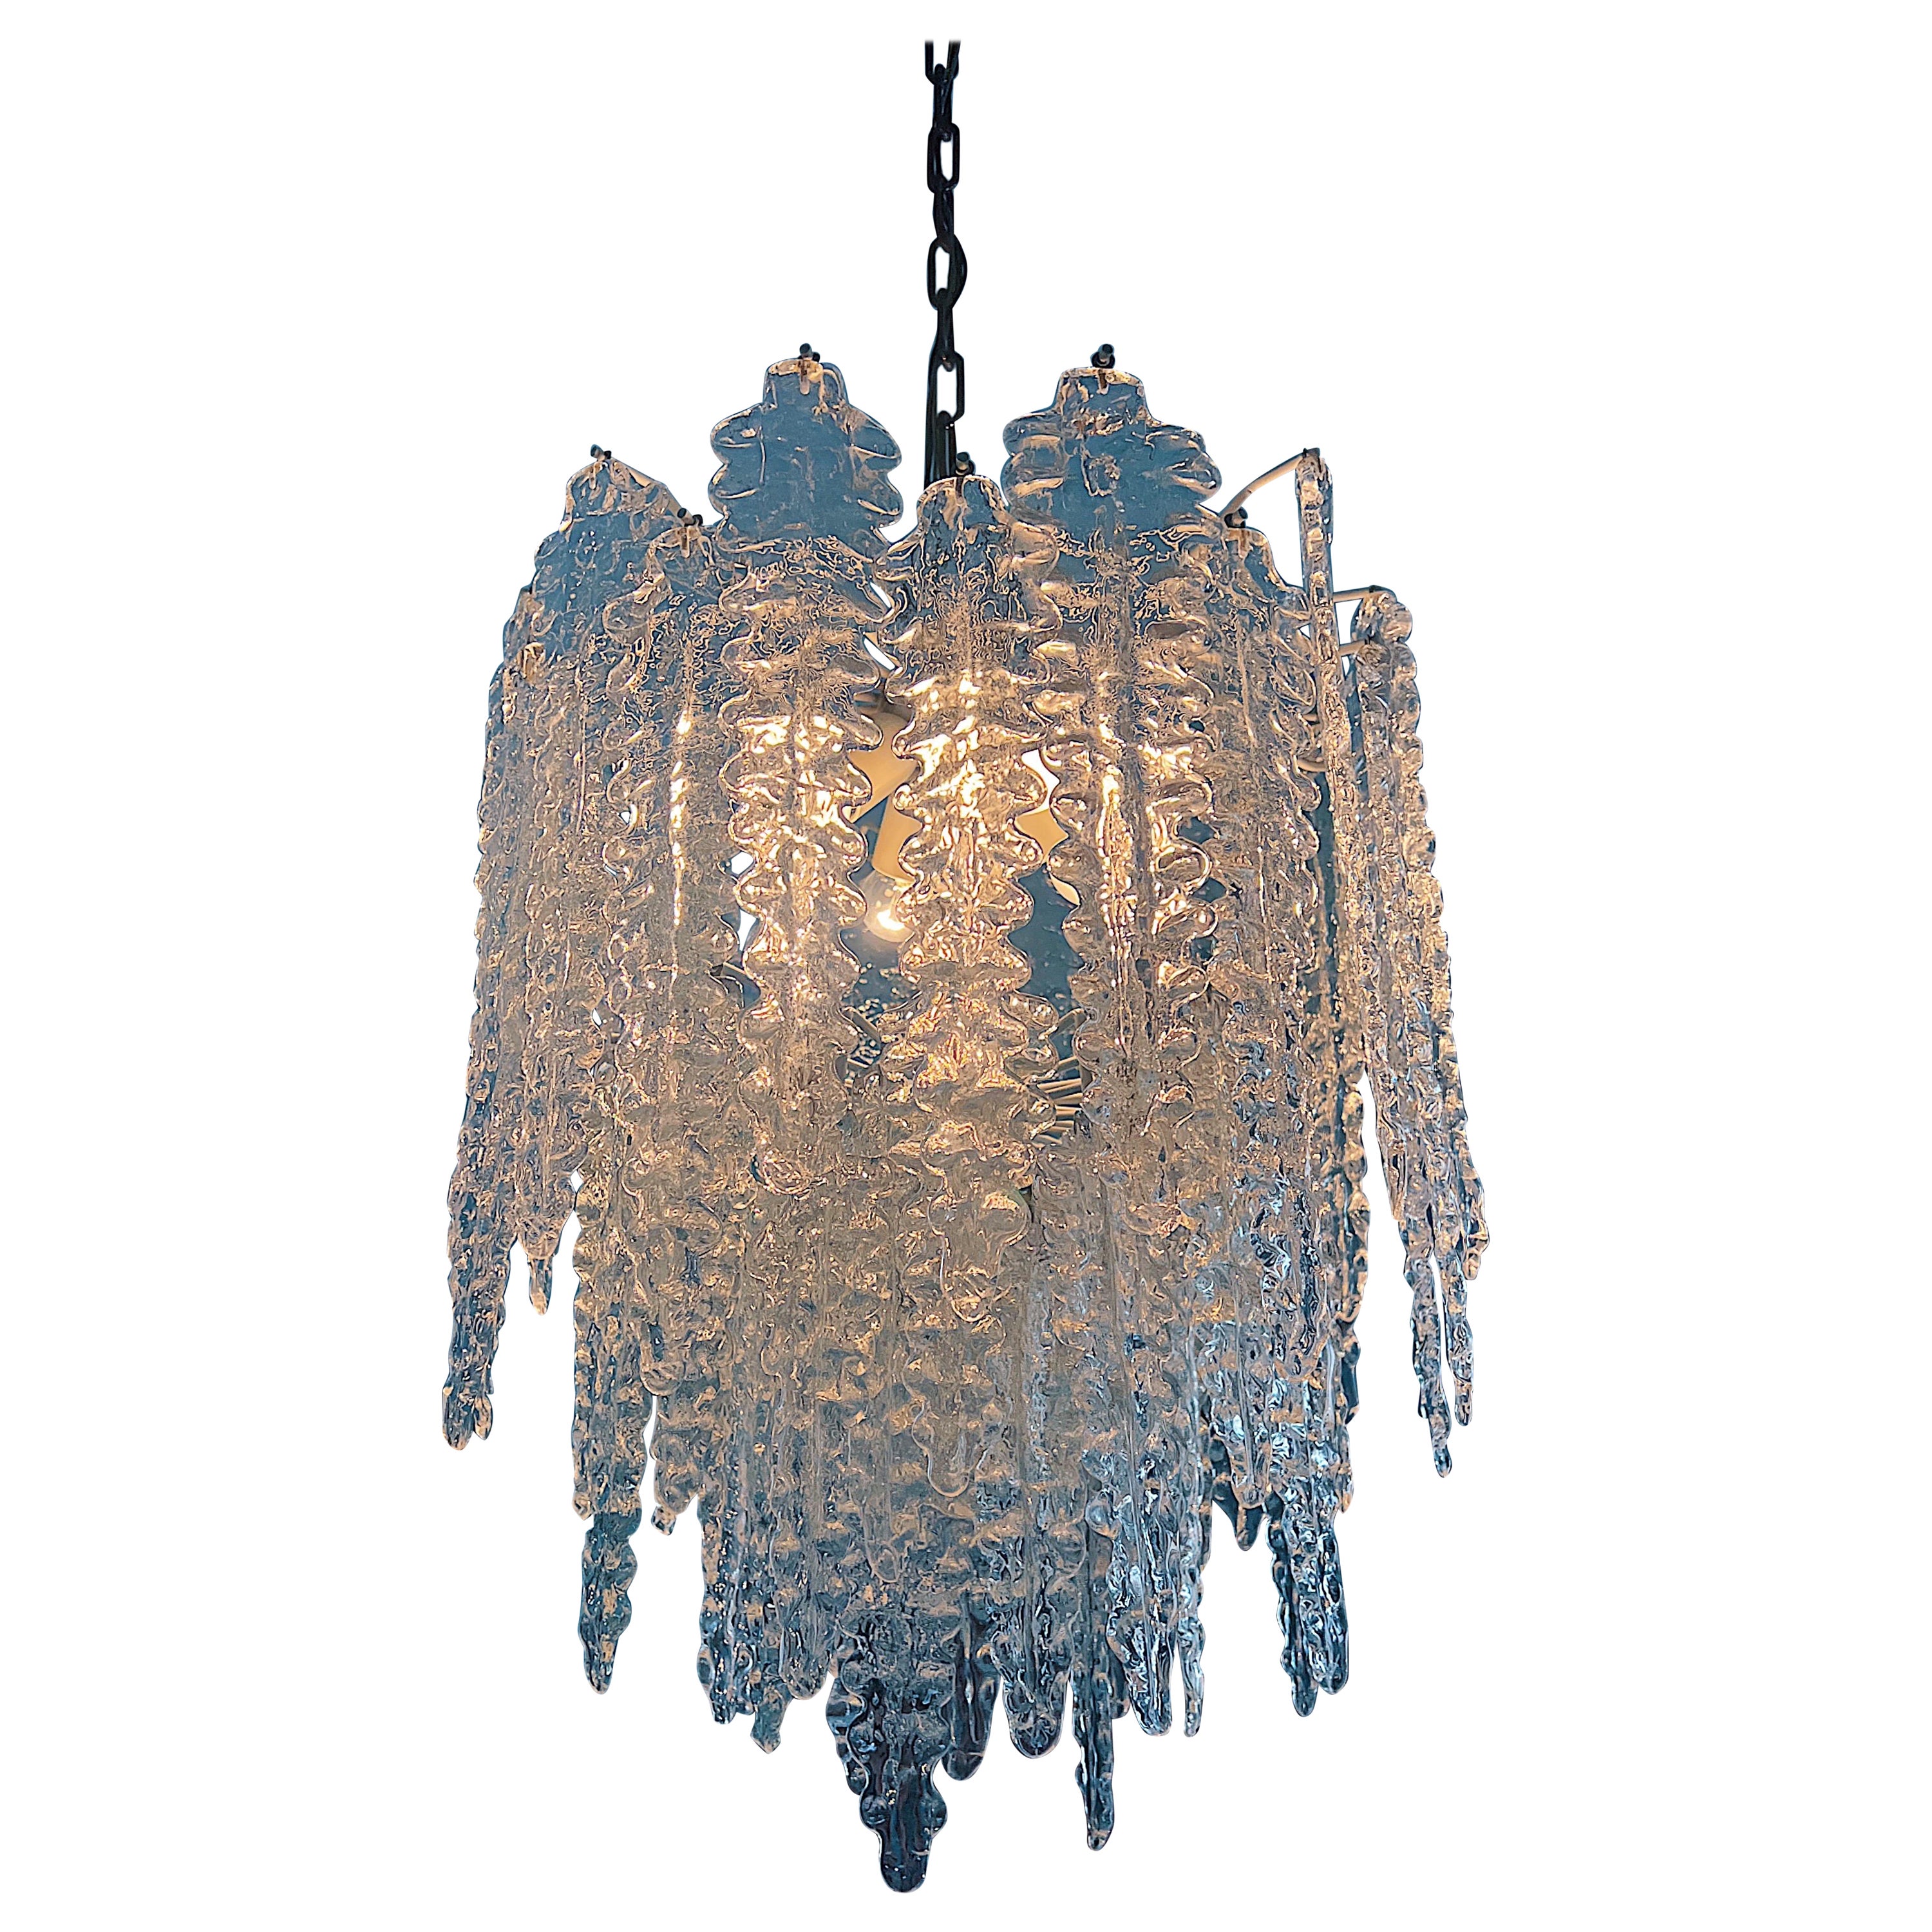 Midcentury Chandelier by Venini, 1960s from the Alga Series For Sale